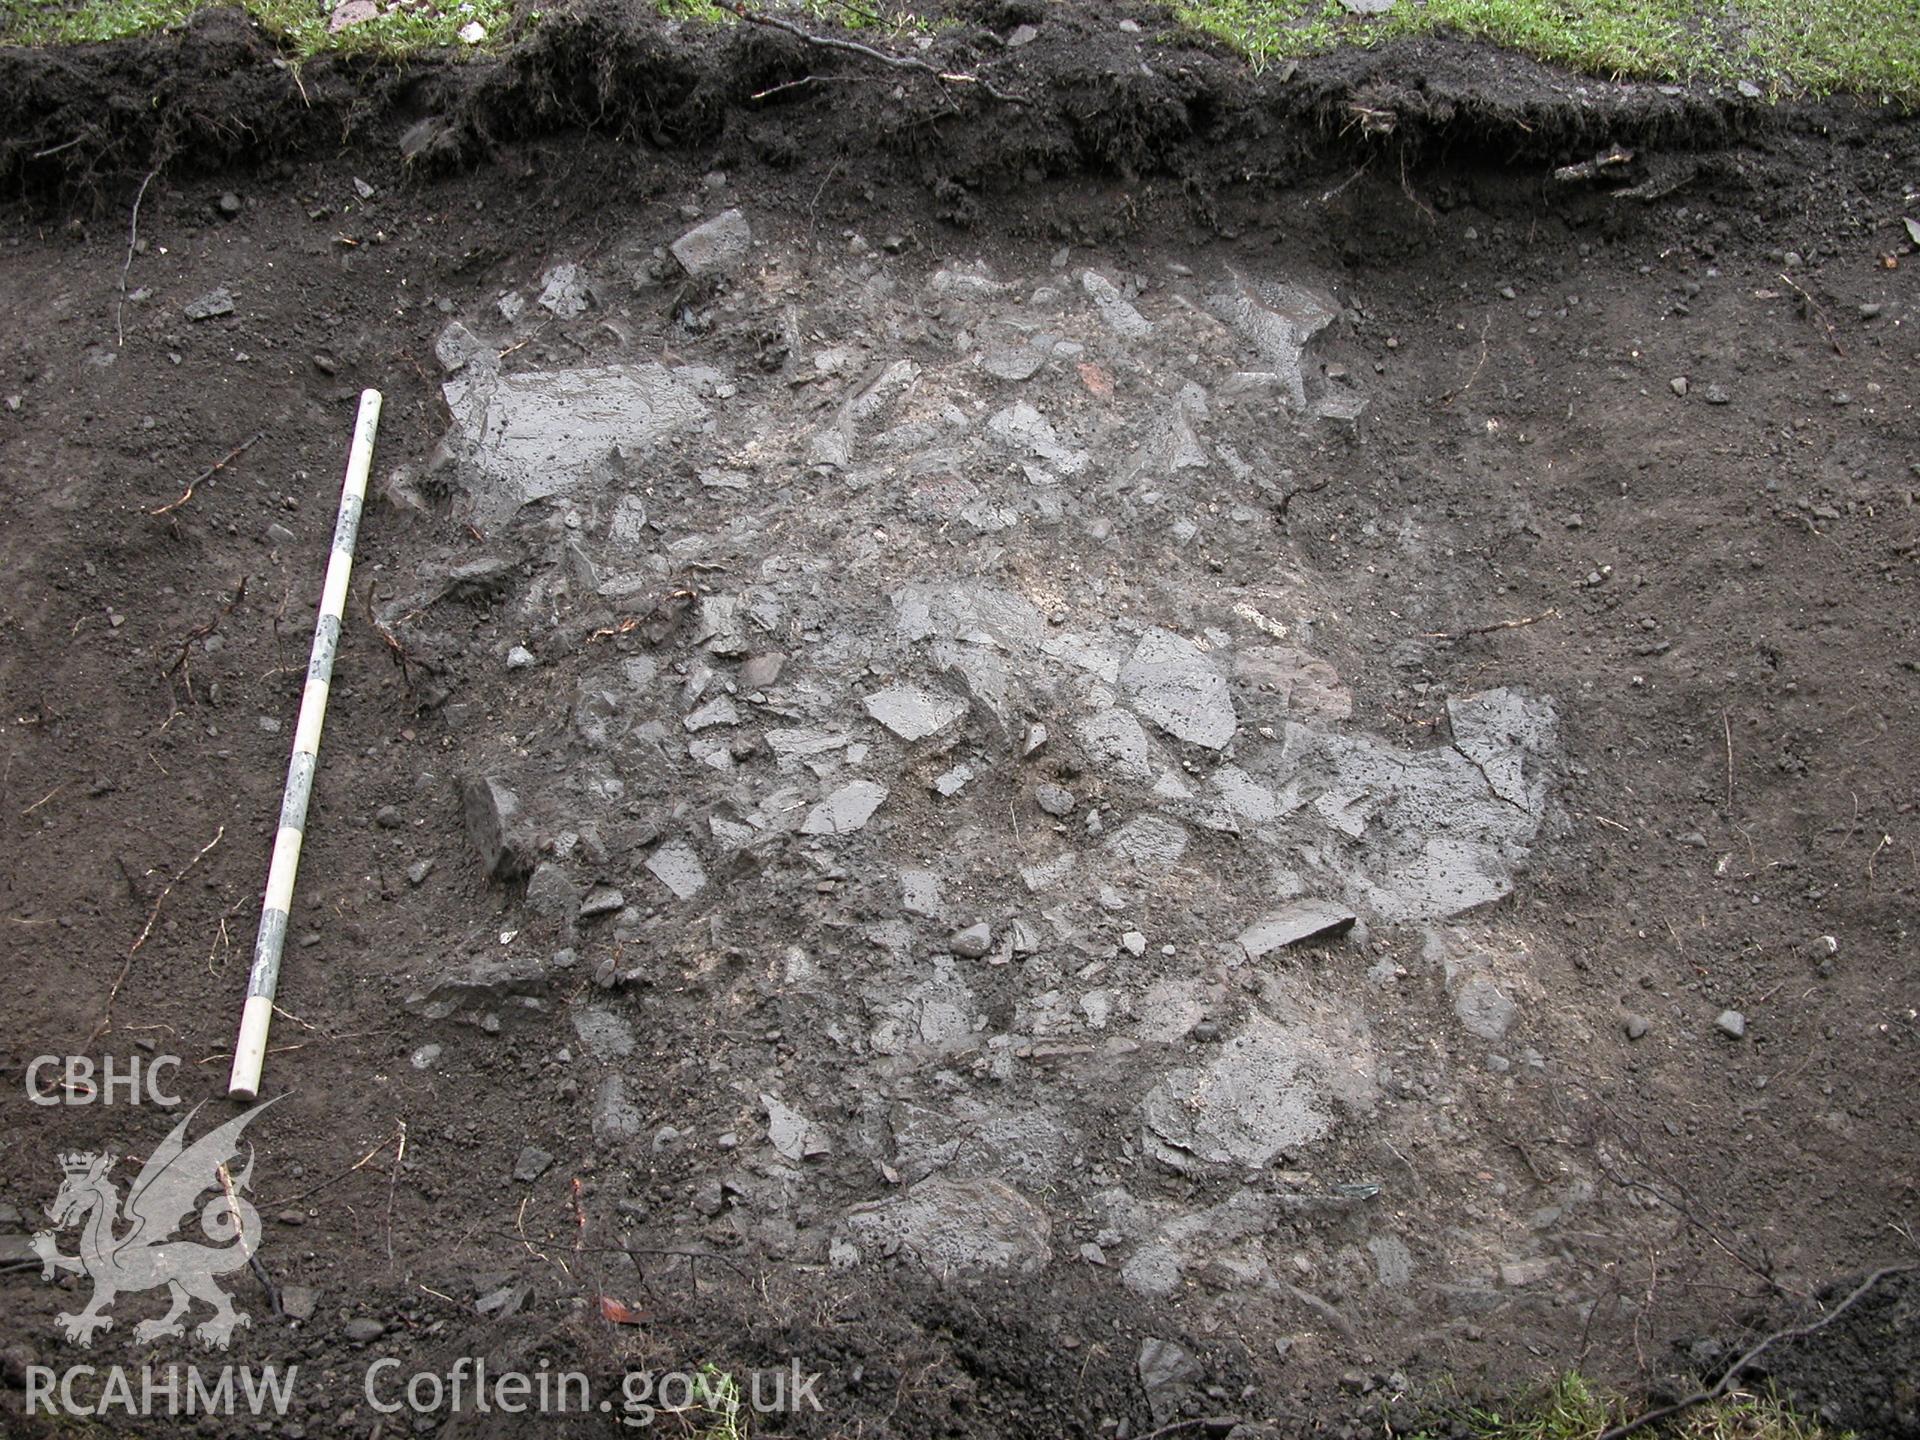 Uncaptioned digital photograph showing trench, taken as part of Archaeological Watching Brief and Desk Based Assessment for the Old Bowling Green, Cannons Lane, Presteigne. CAP Report Number 653.